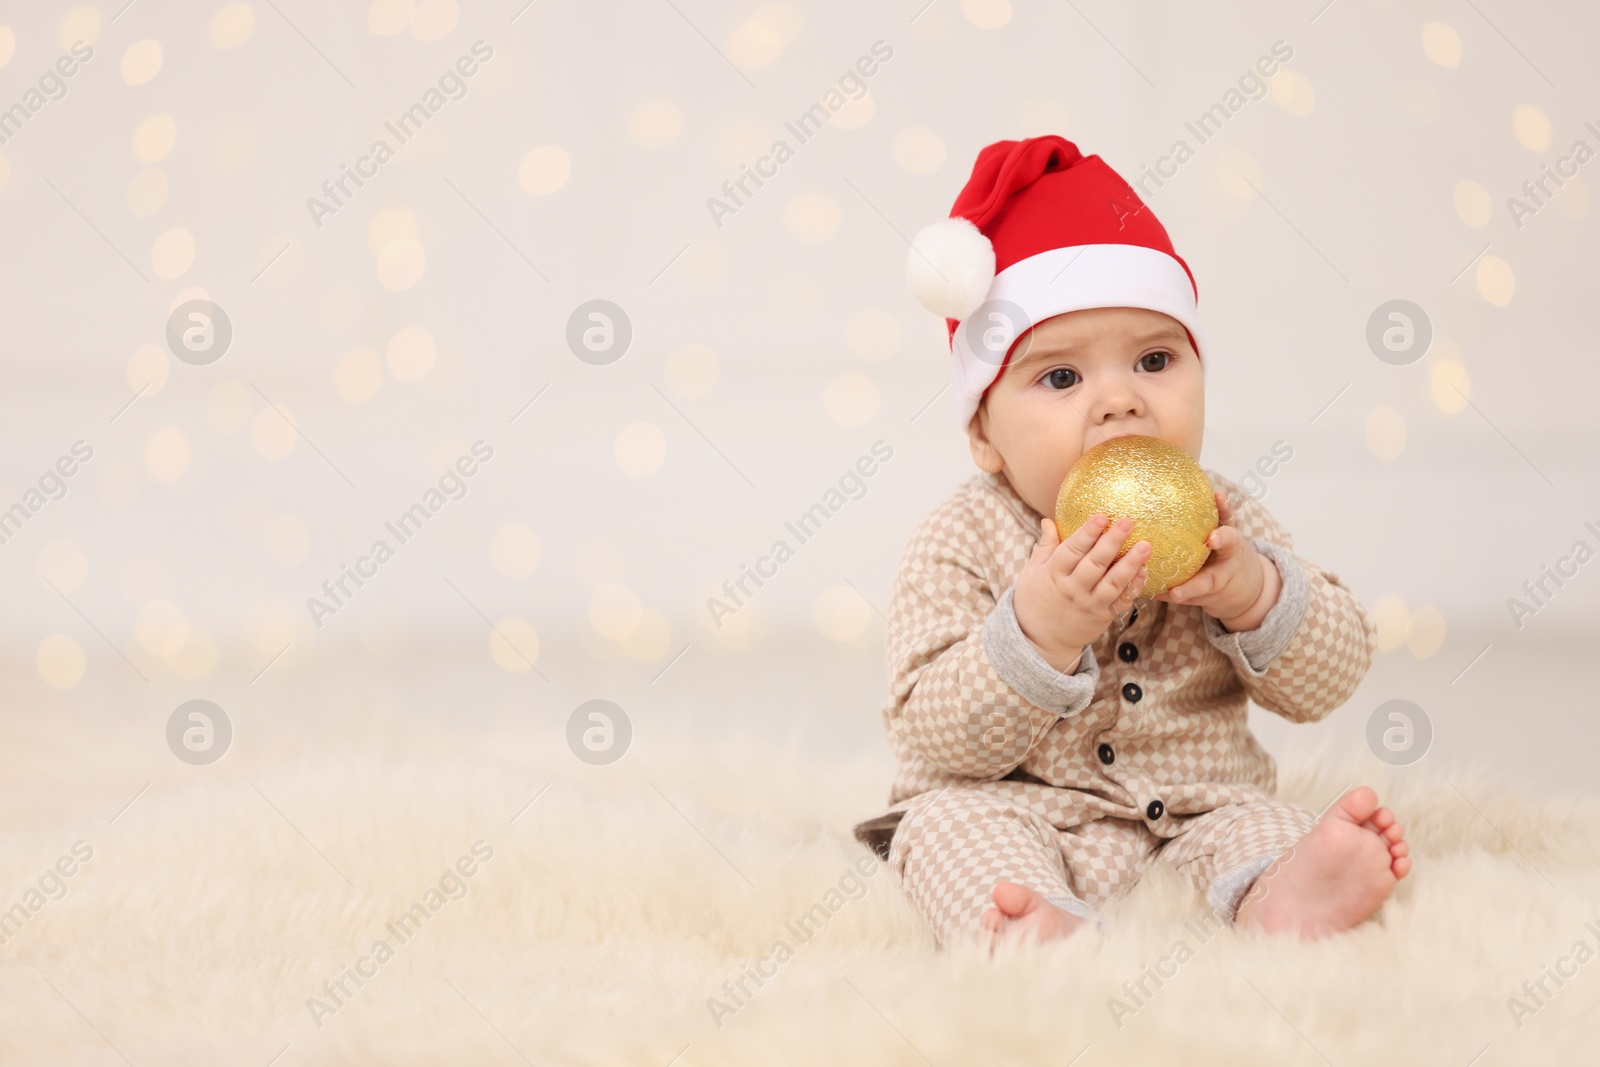 Photo of Cute baby in Santa hat with Christmas bauble on fluffy carpet against blurred festive lights, space for text. Winter holiday